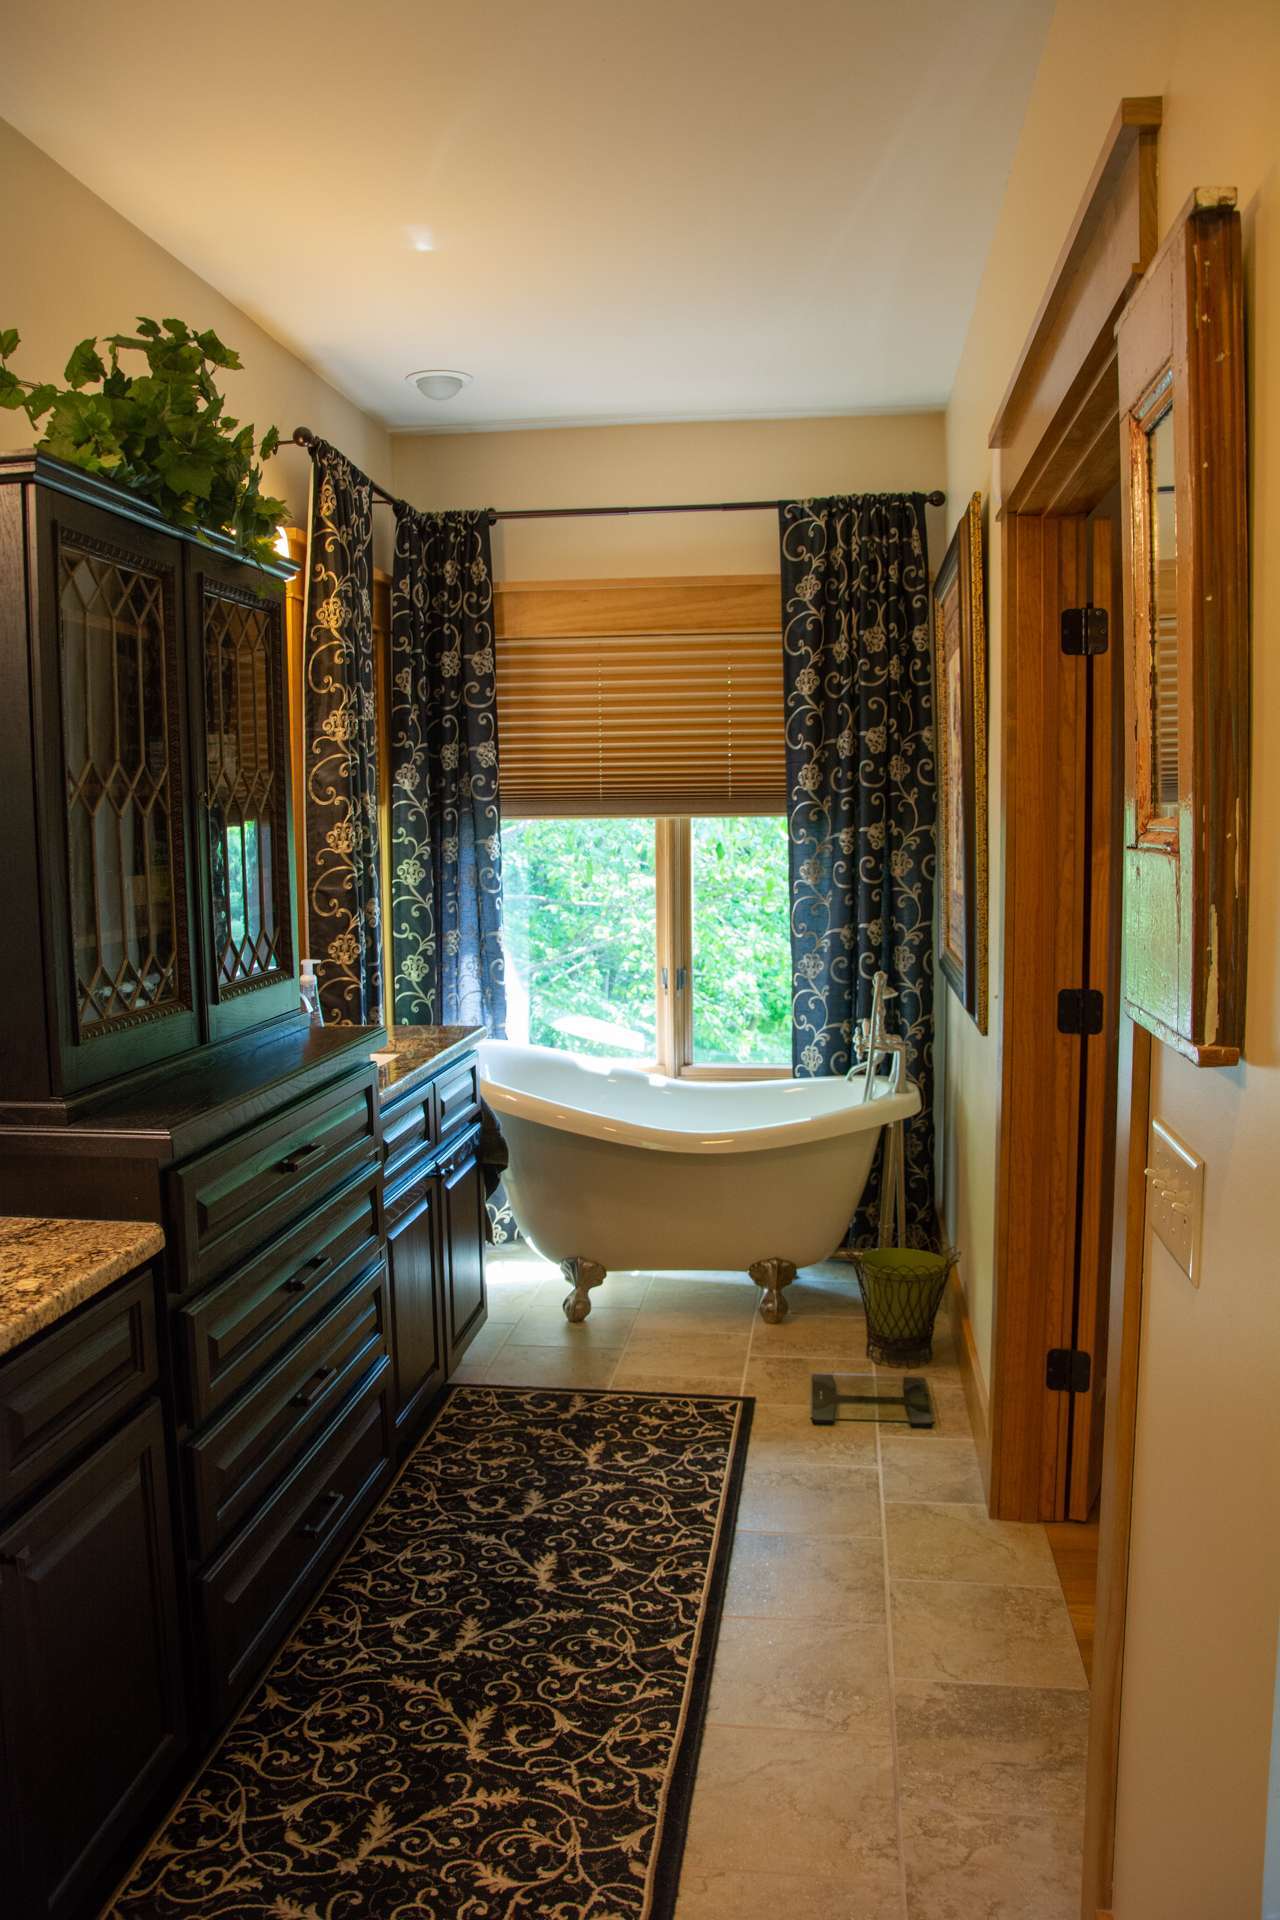 The master bath is a testament to luxury and comfort featuring his and hers vanities, tiled floor, clawfoot soaking tub and a separate walk-in tiled shower.